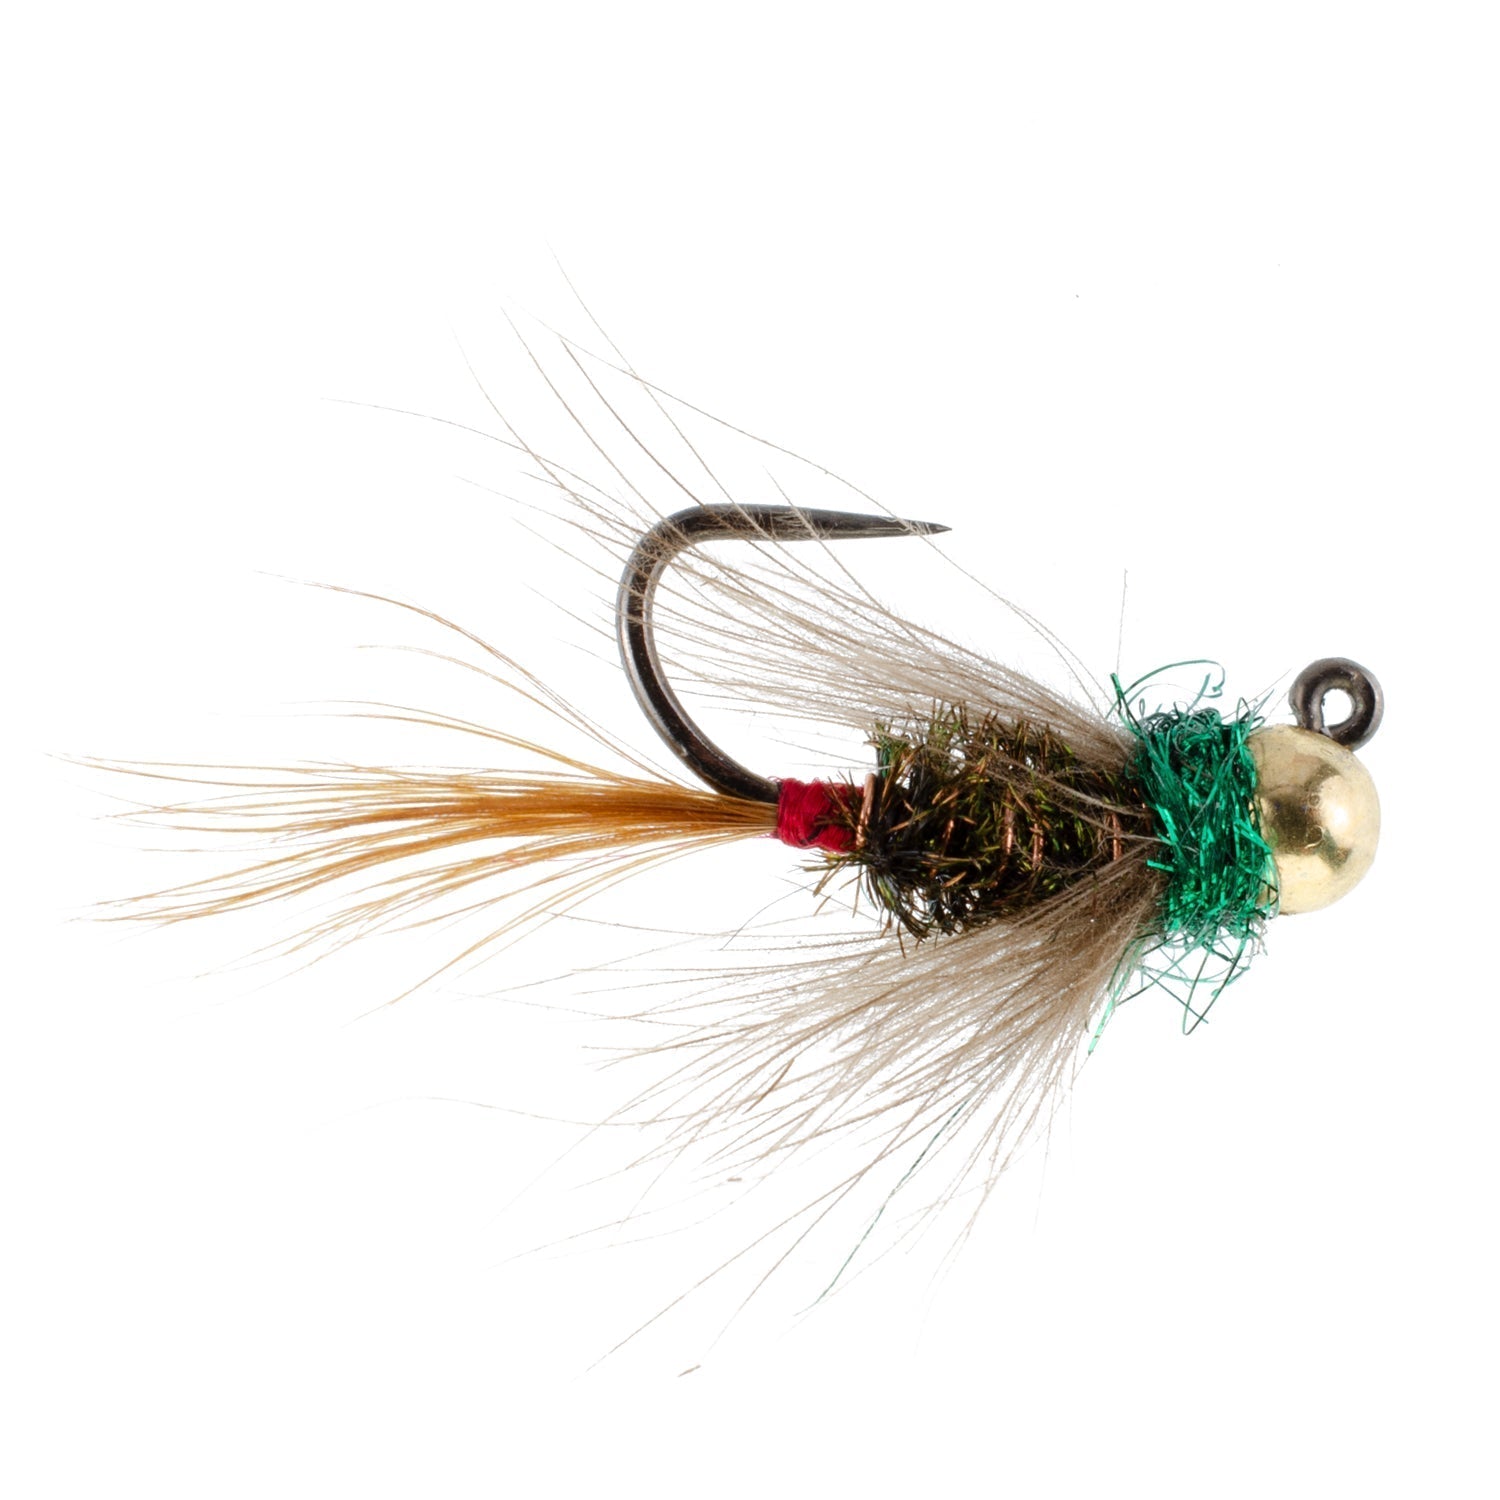 Tungsten Bead Tactical CDC Frenchie Czech Nymph Euro Nymphing Fly - 1 docena de moscas tamaño 16 